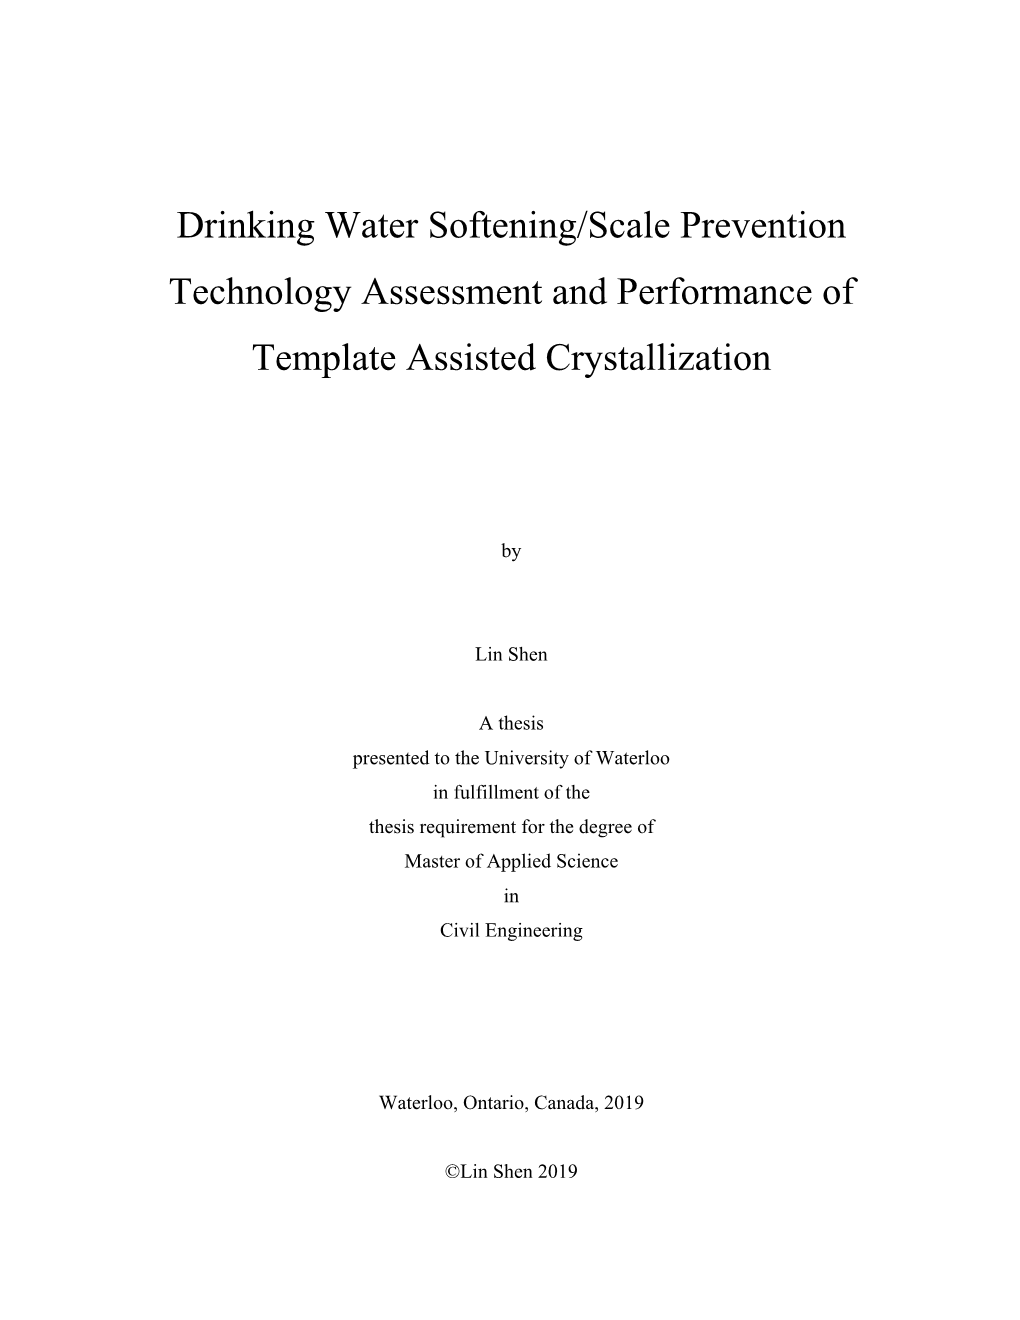 Drinking Water Softening/Scale Prevention Technology Assessment and Performance of Template Assisted Crystallization